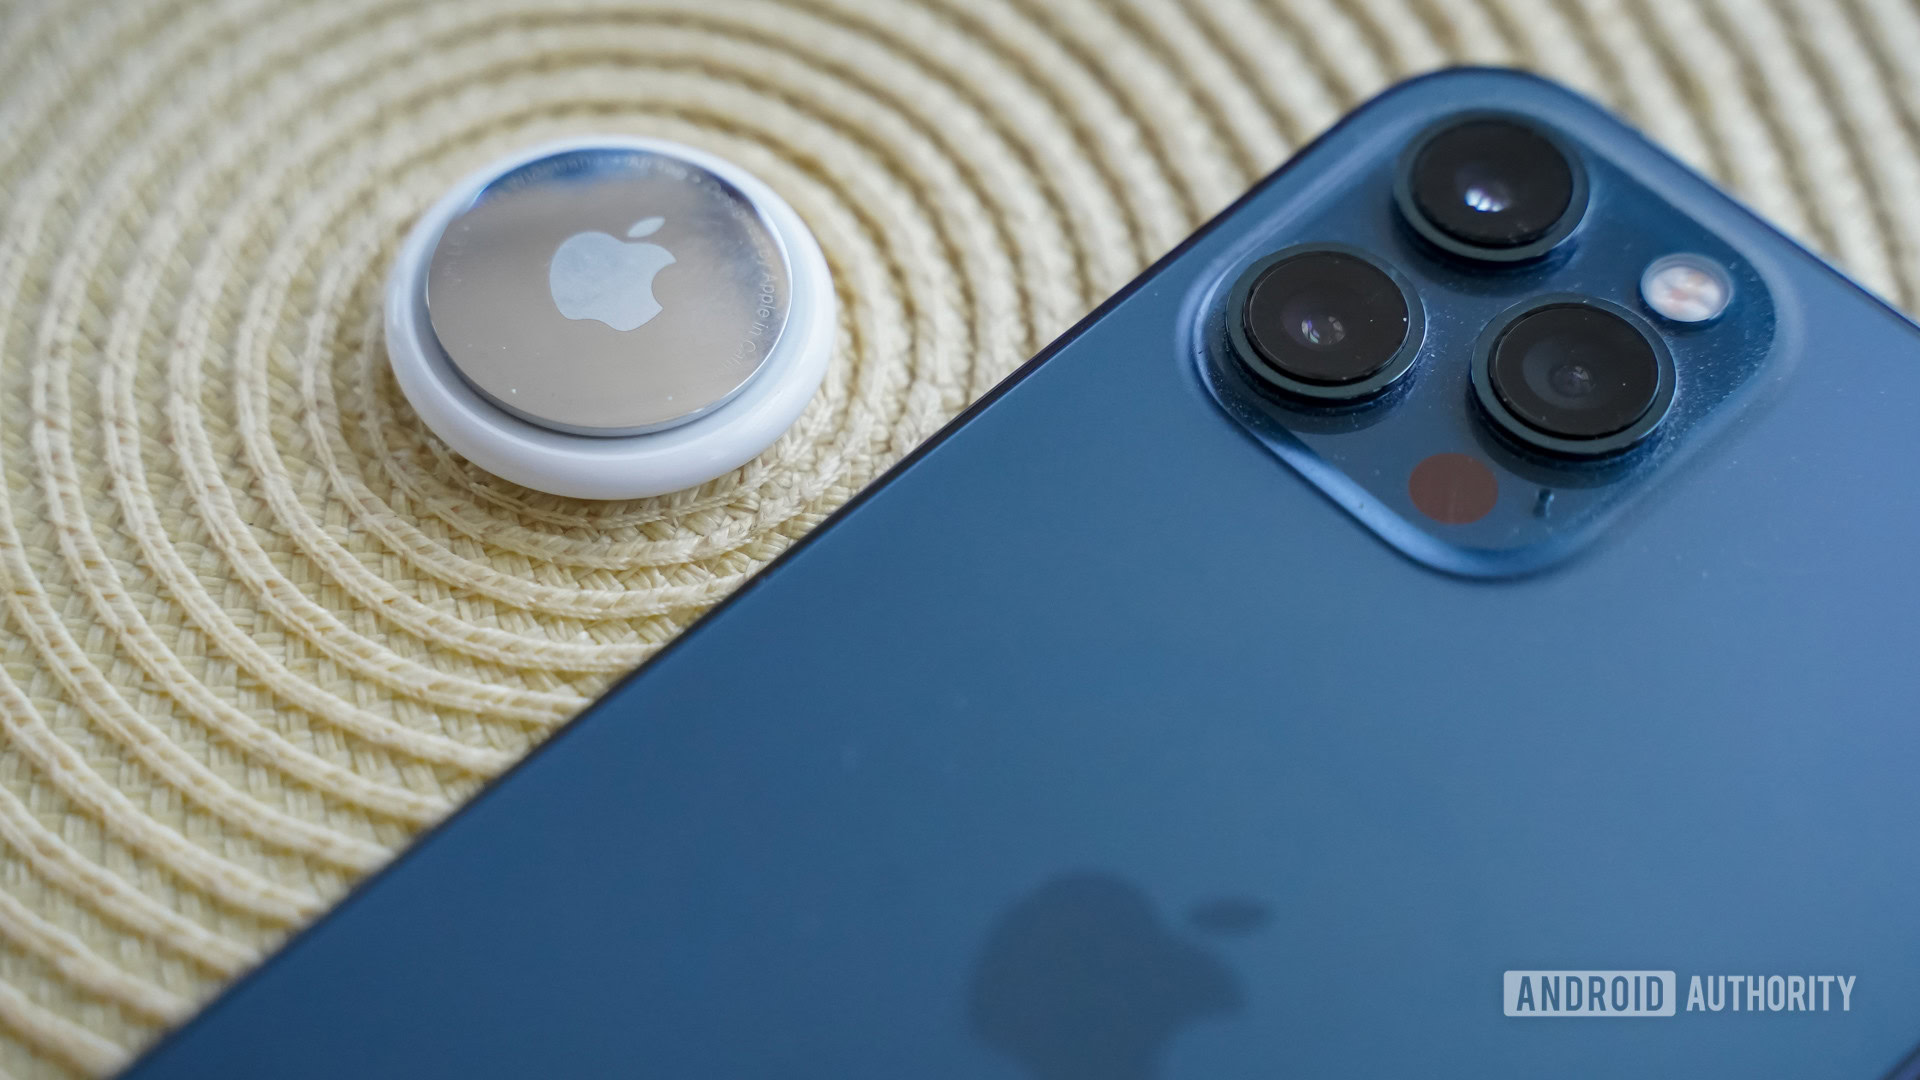 Apple AirTags: The Complete Guide to How They Work, What to Track